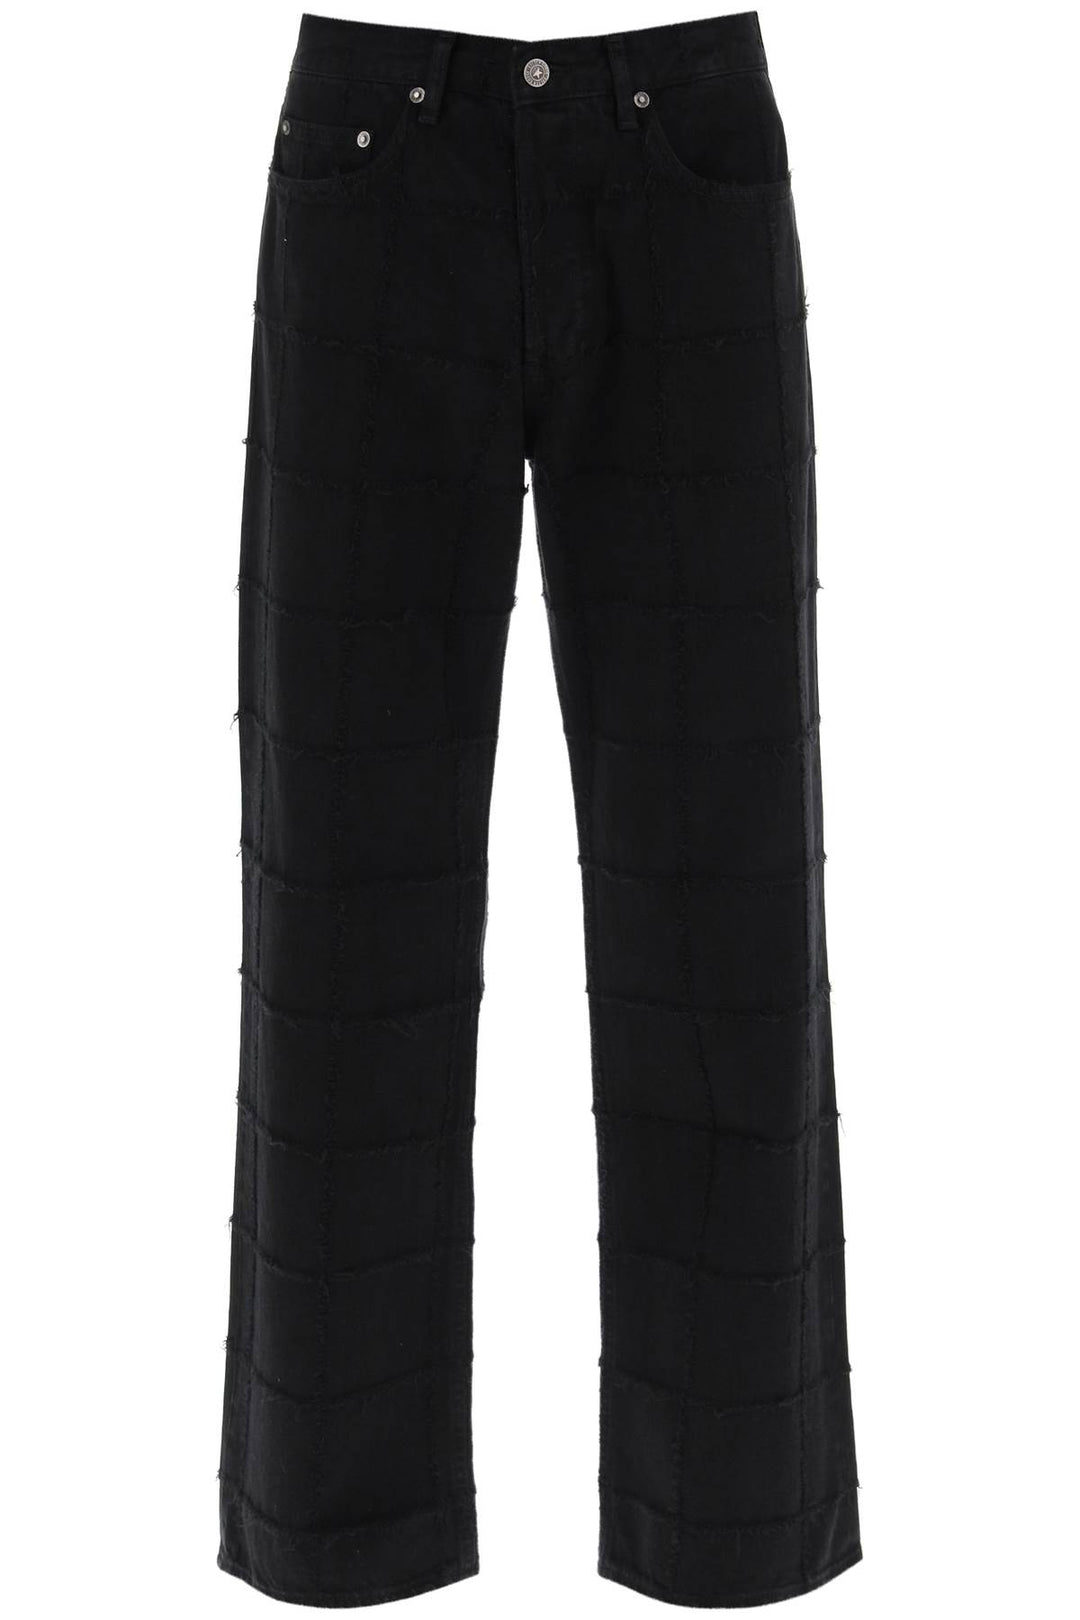 Golden Goose 'Skate' Jeans With Check Scratchy Motif   Nero